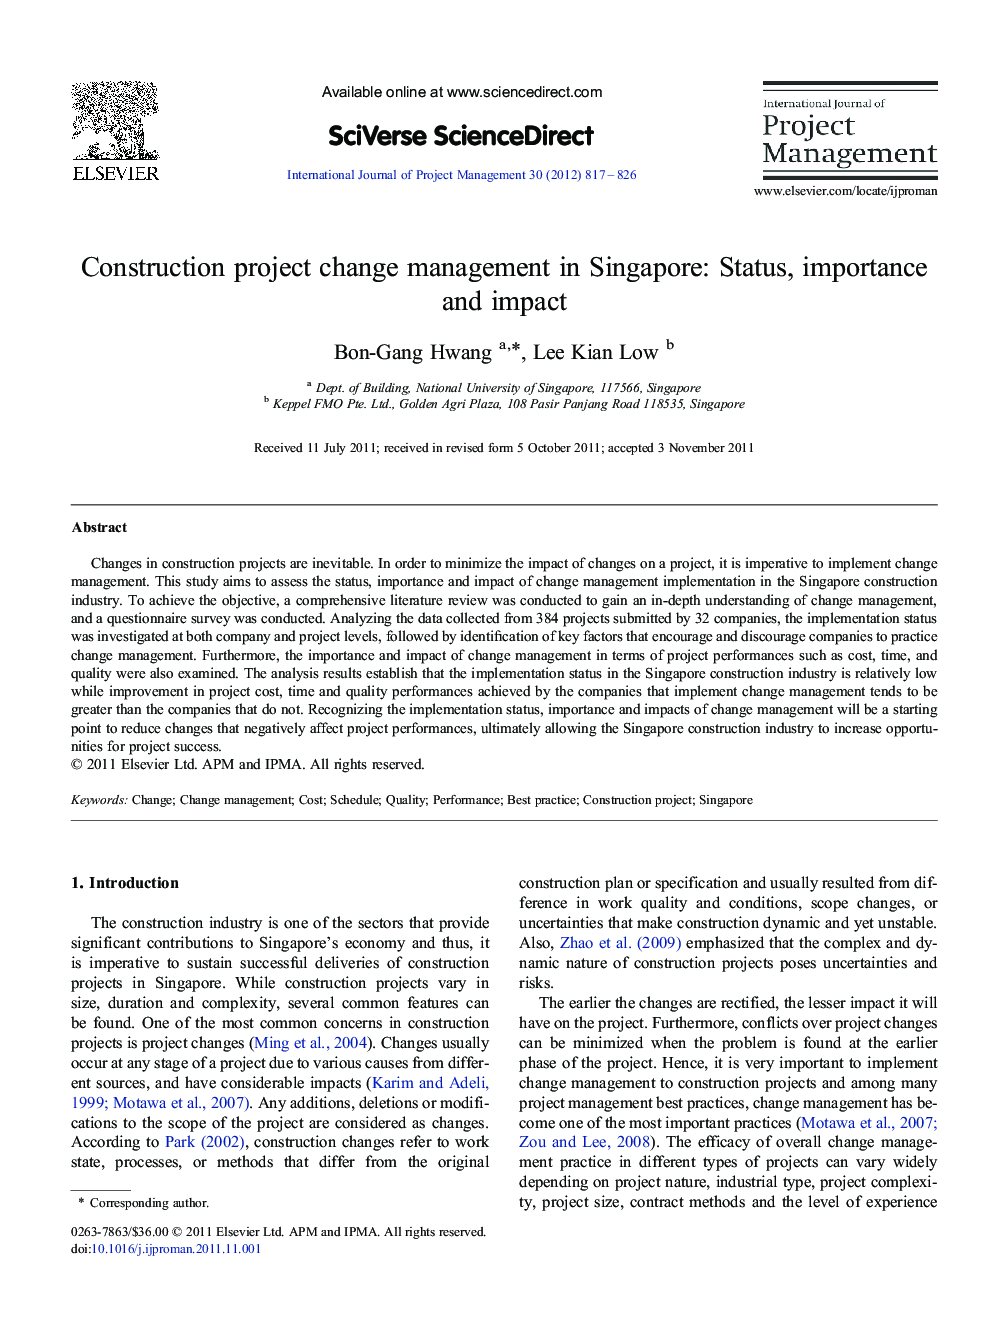 Construction project change management in Singapore: Status, importance and impact